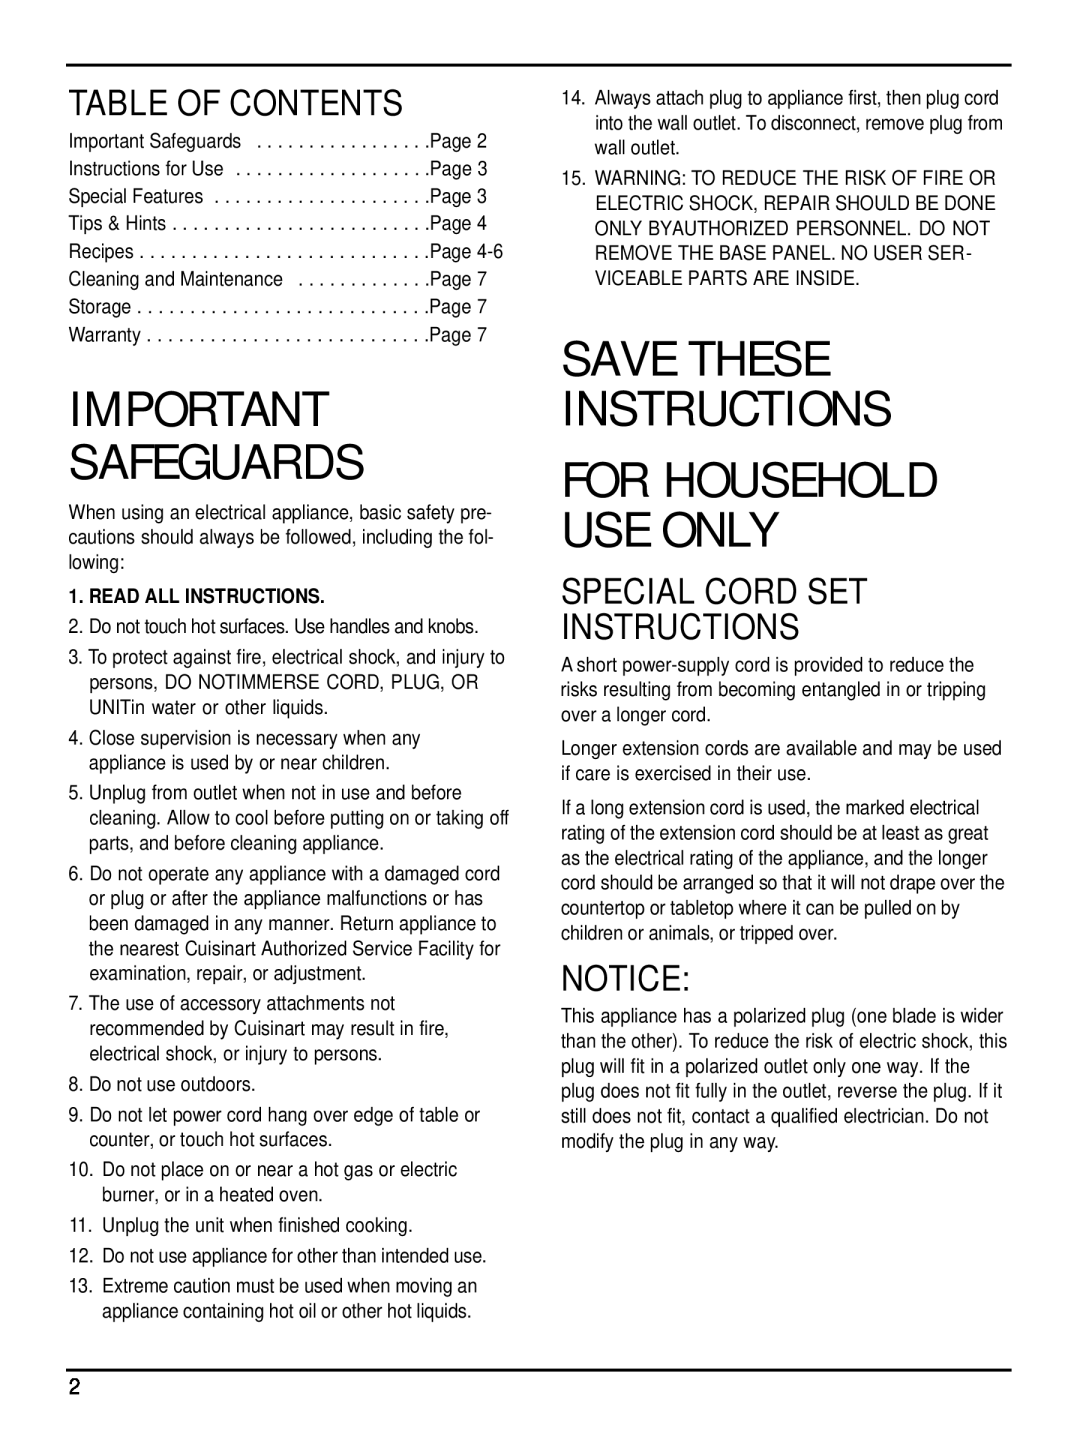 Cuisinart WM-SW2C manual Table Of Contents, Special Cord Set Instructions, Safeguards, Save These Instructions 